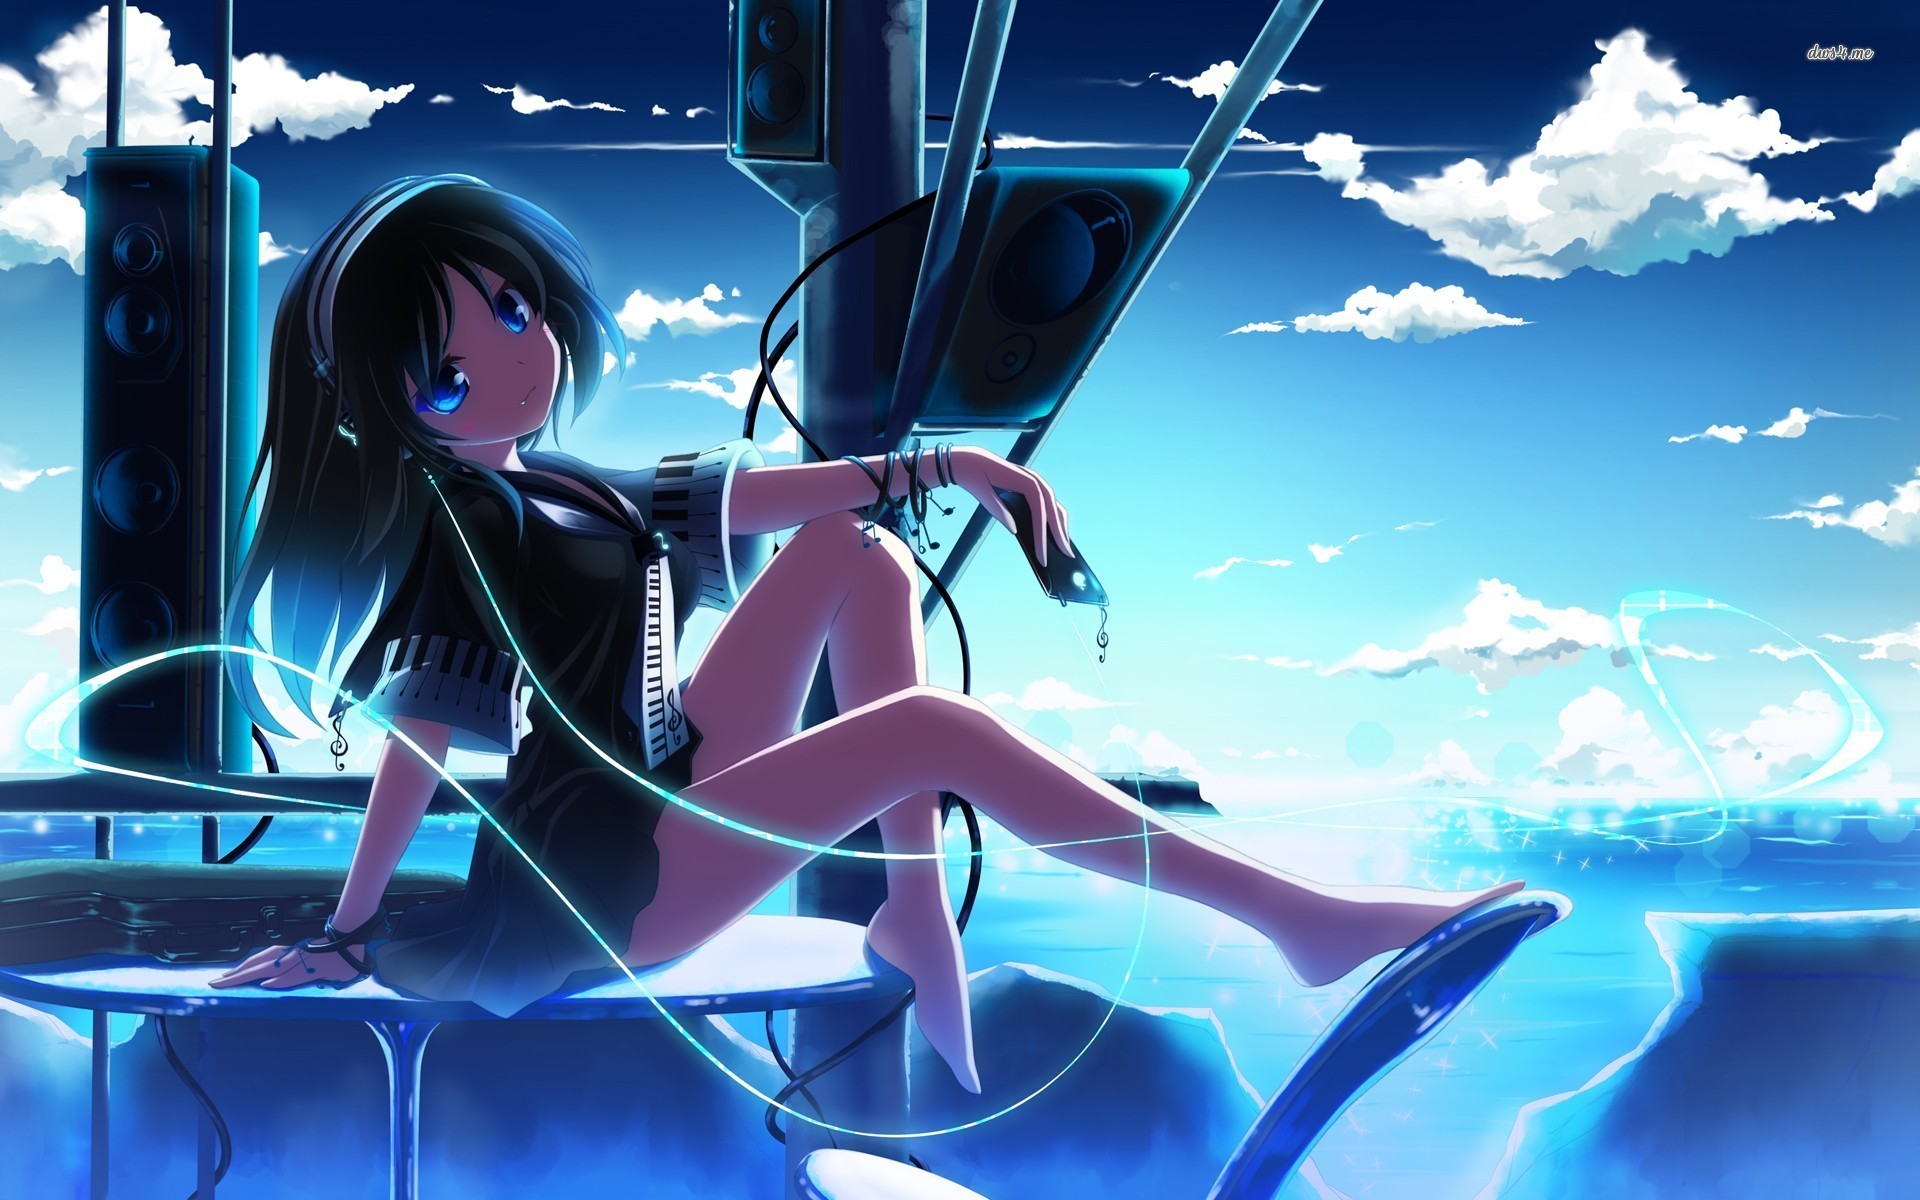 1920x1200 anime images wallpaper | anime backgrounds manga alphacoders | catherynn's  place | Pinterest | Anime, Manga and Wallpaper